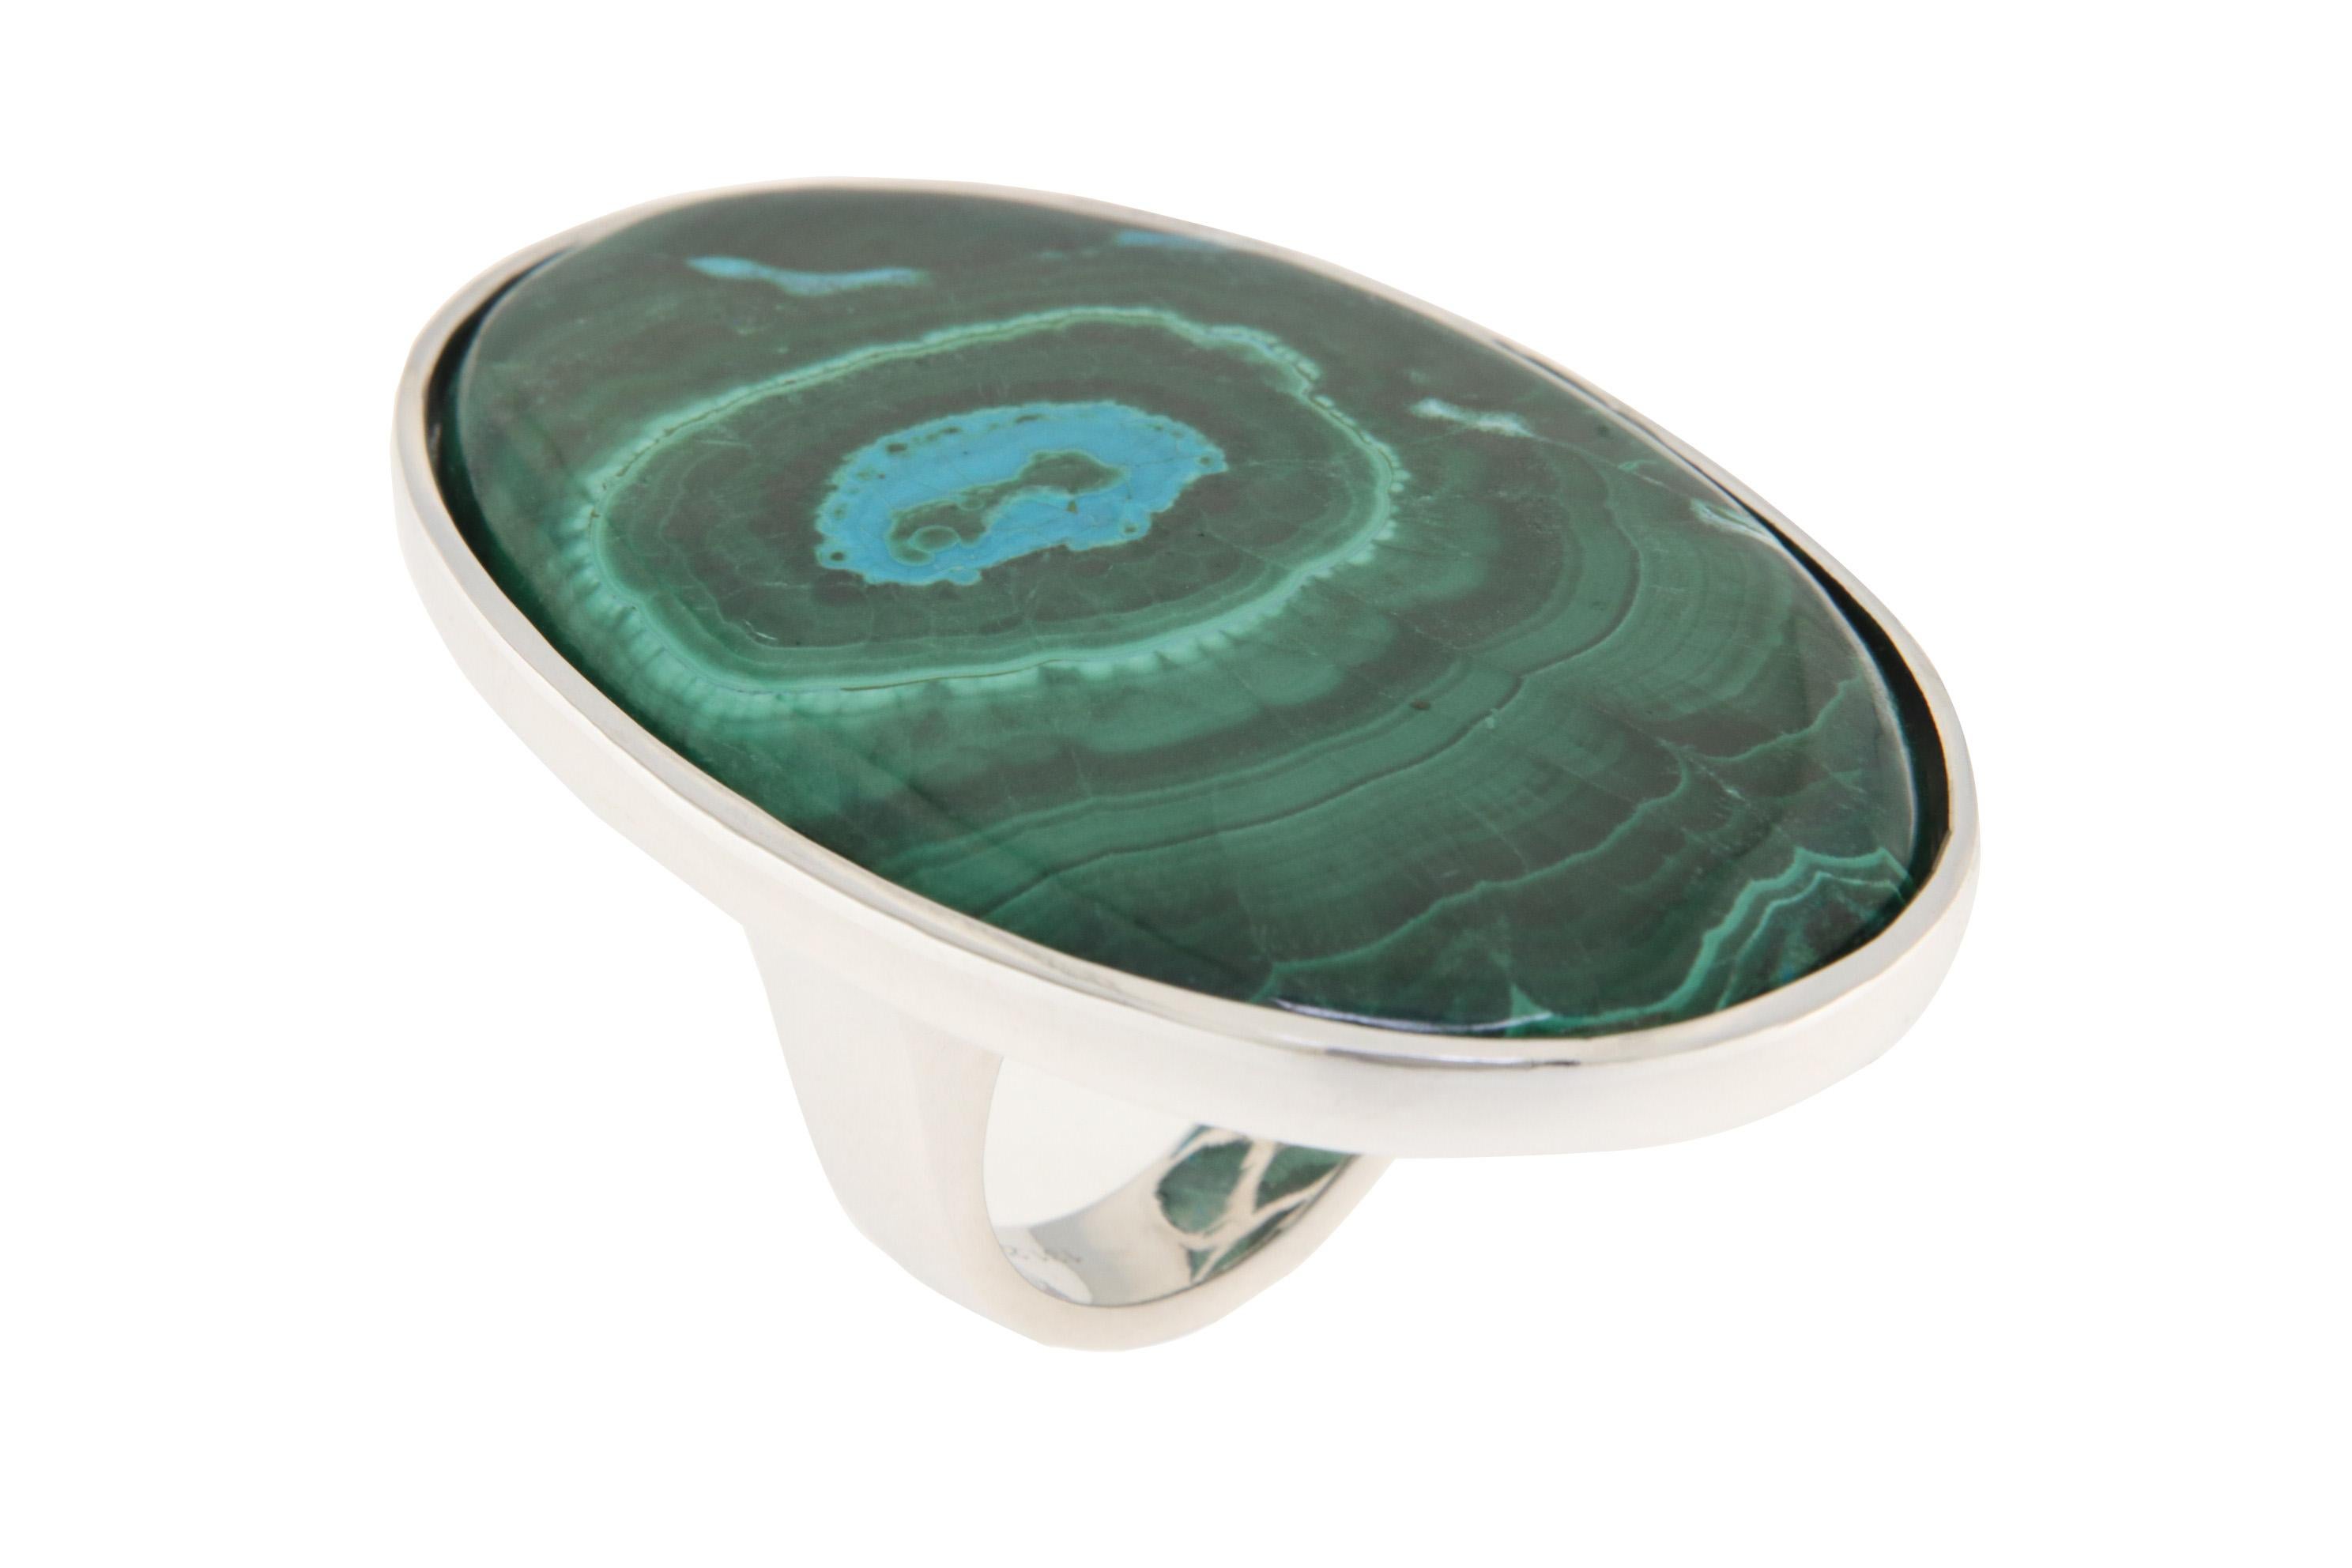 Orloff of Denmark; 131 carat Azurite-Malachite Ring fashioned out of 925 Sterling Silver.

This statement ring features a stunning 131-carat azurite-malachite gemstone, known for its rich and vibrant contrasting colors. The deep, almost velvety,